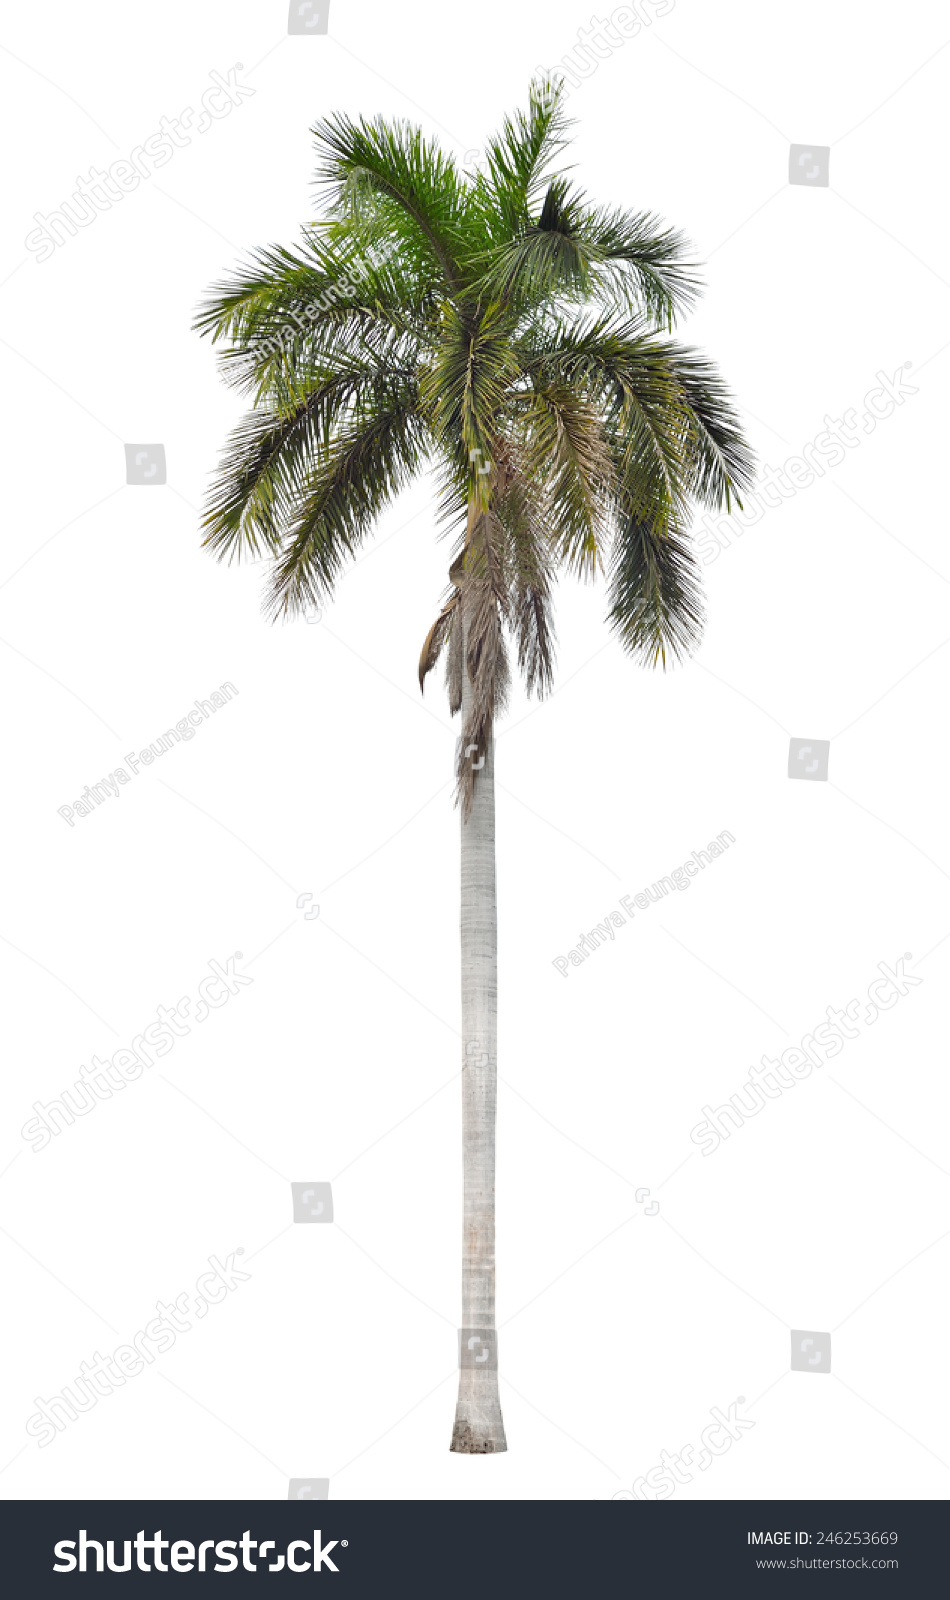 Do Palm Trees Shed Leaves